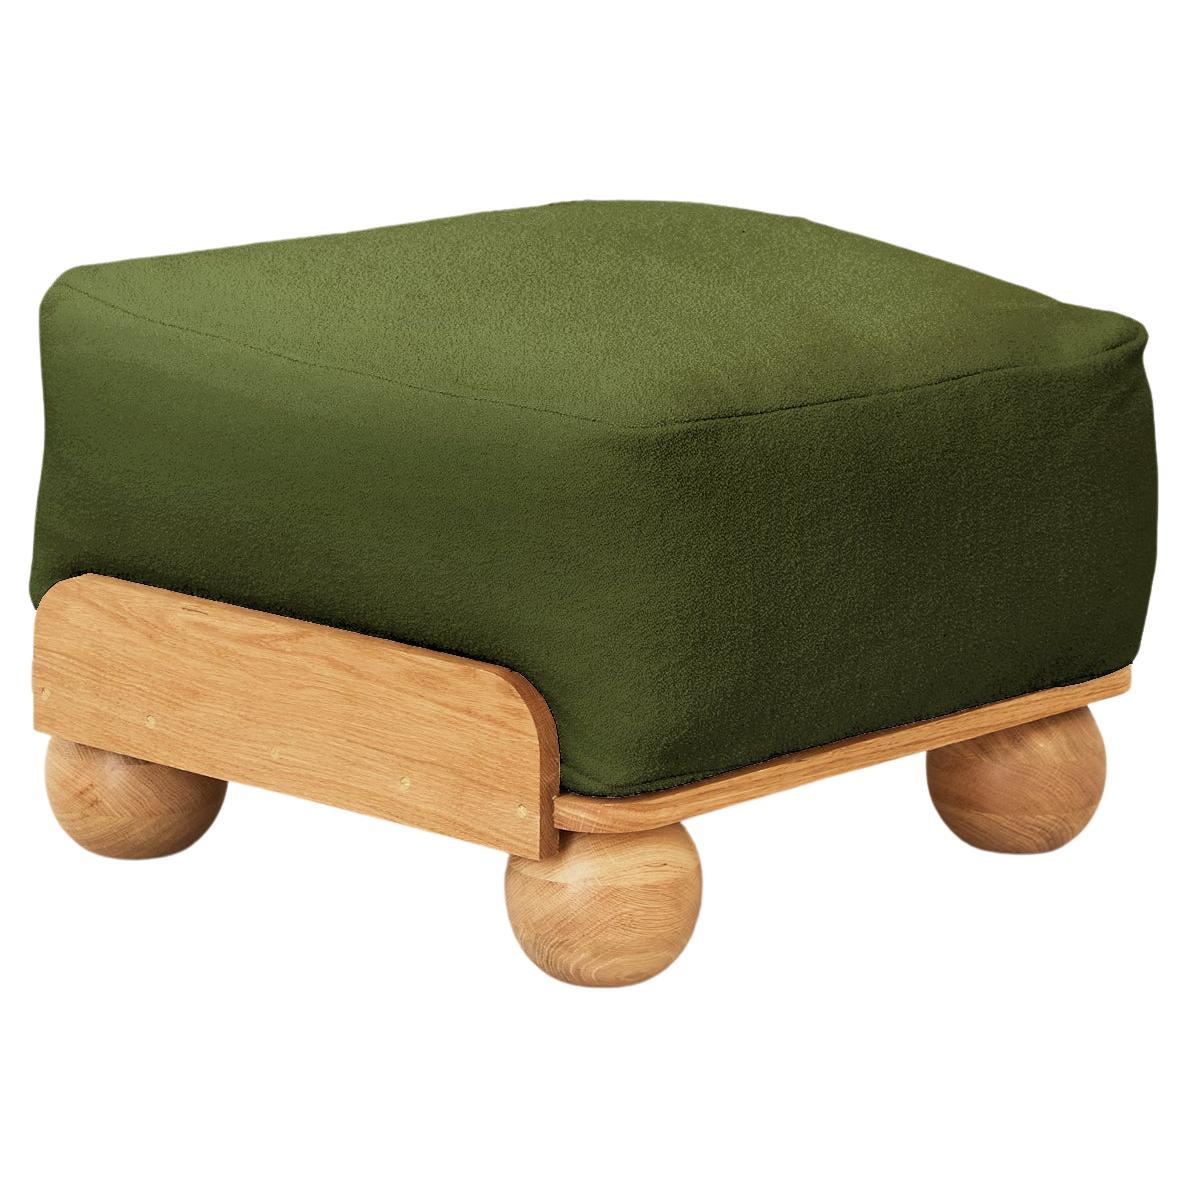 Cove Footstool in Woodland Green